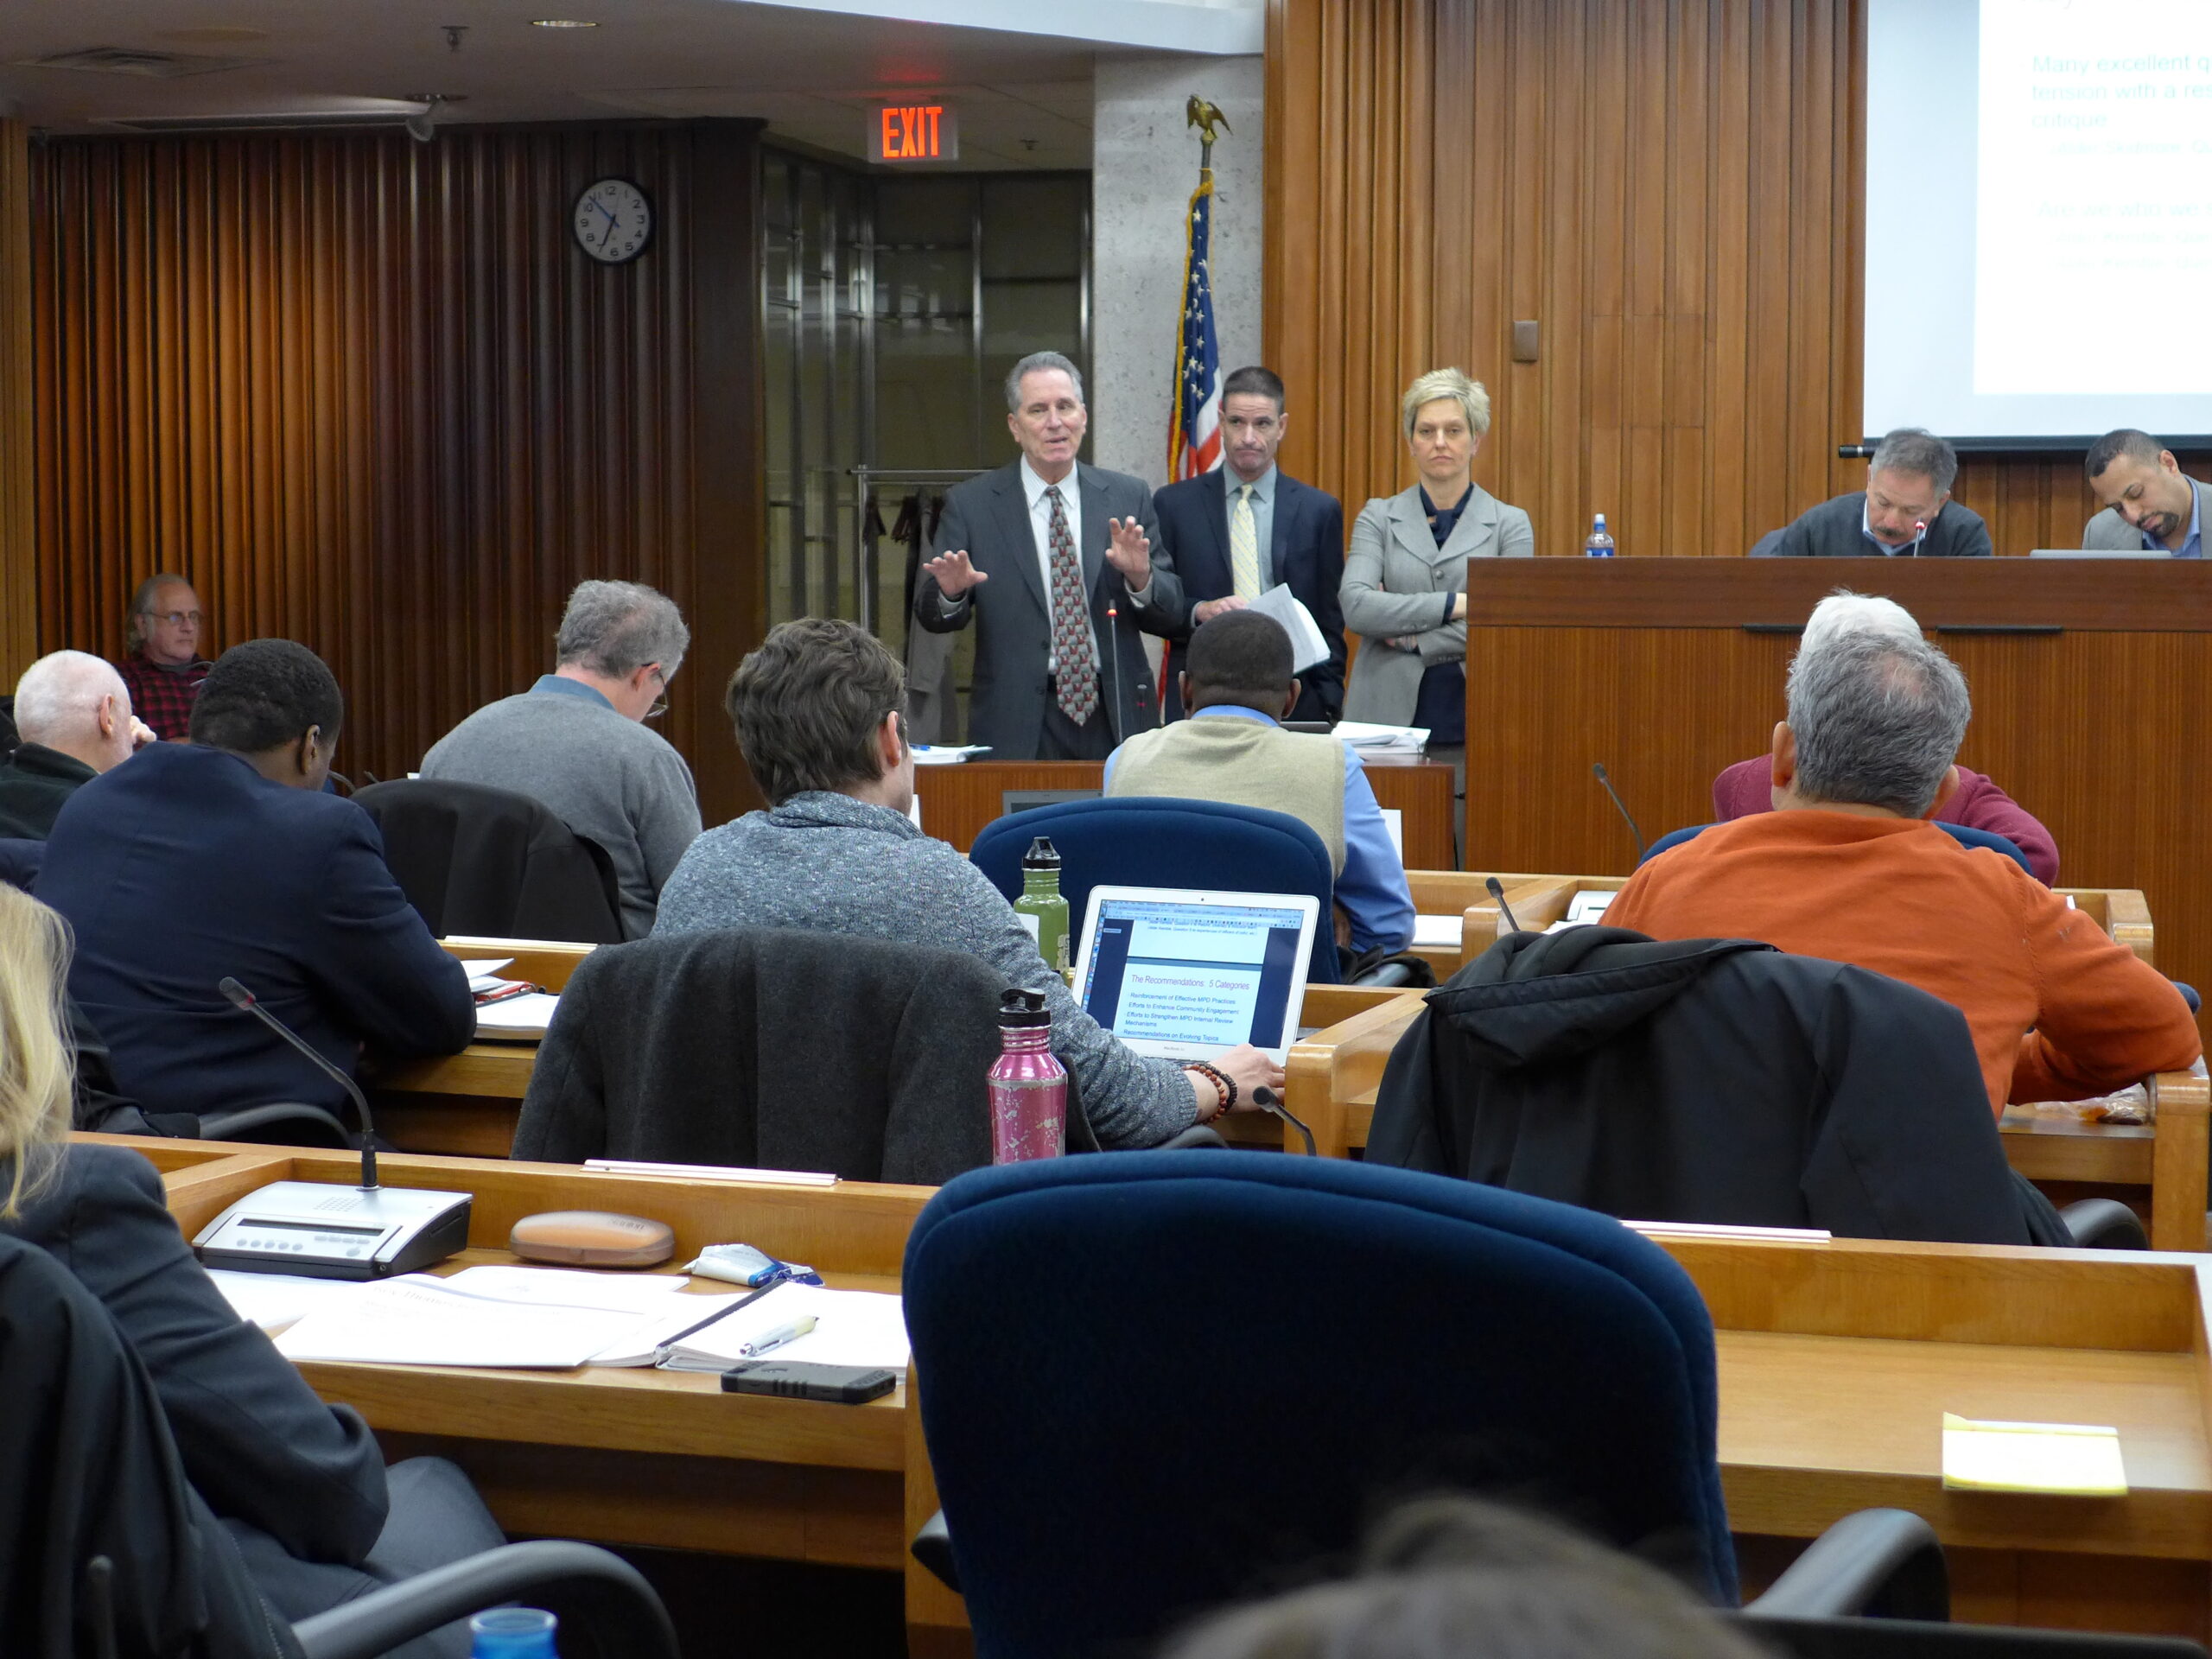 OIR Group presents at Madison City Council meeting